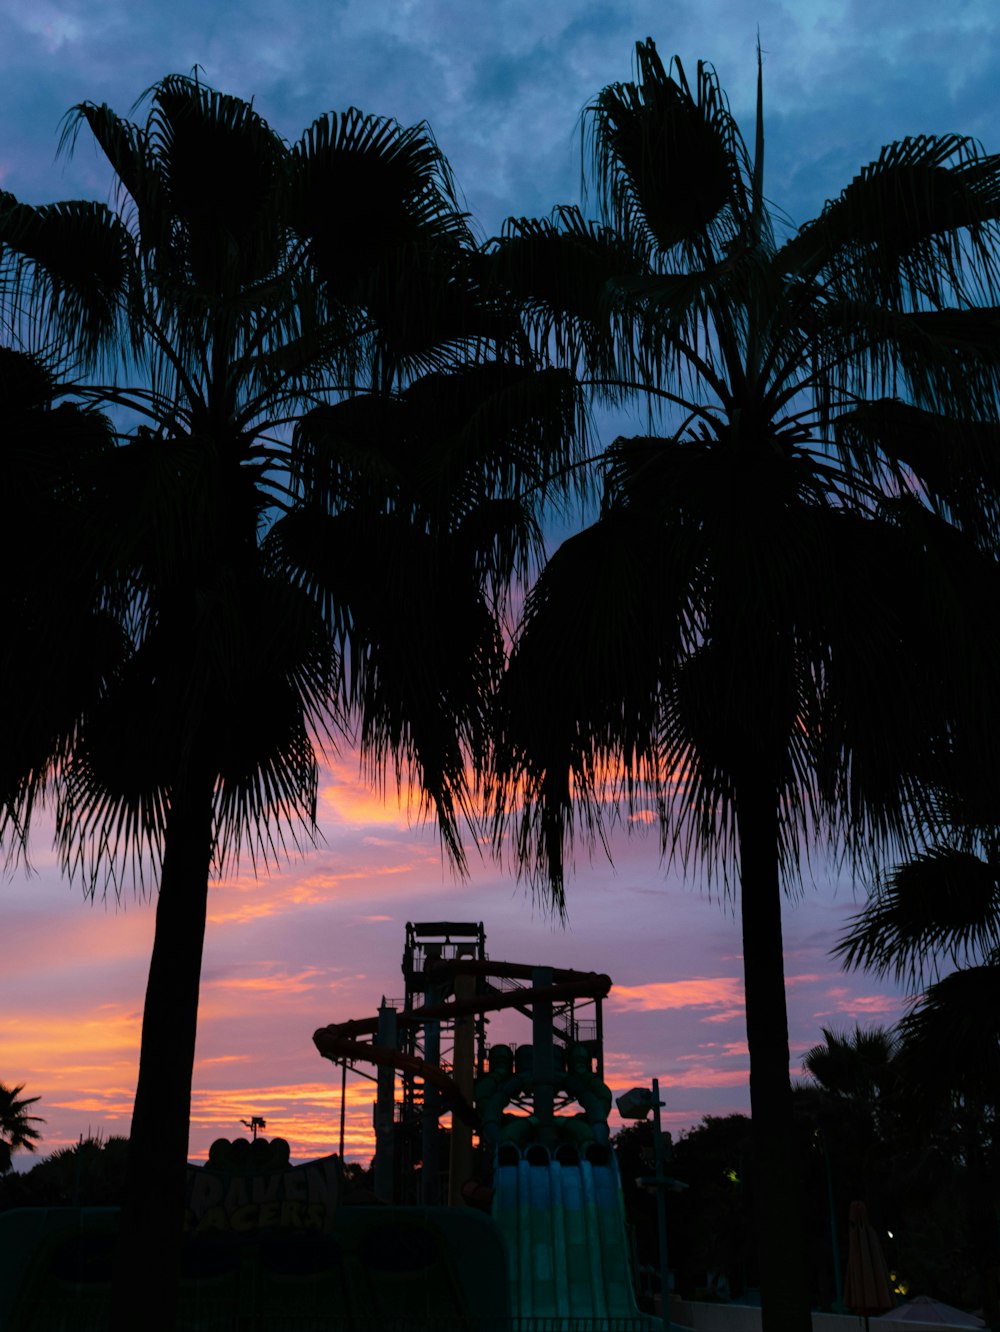 palm trees and a water slide at sunset